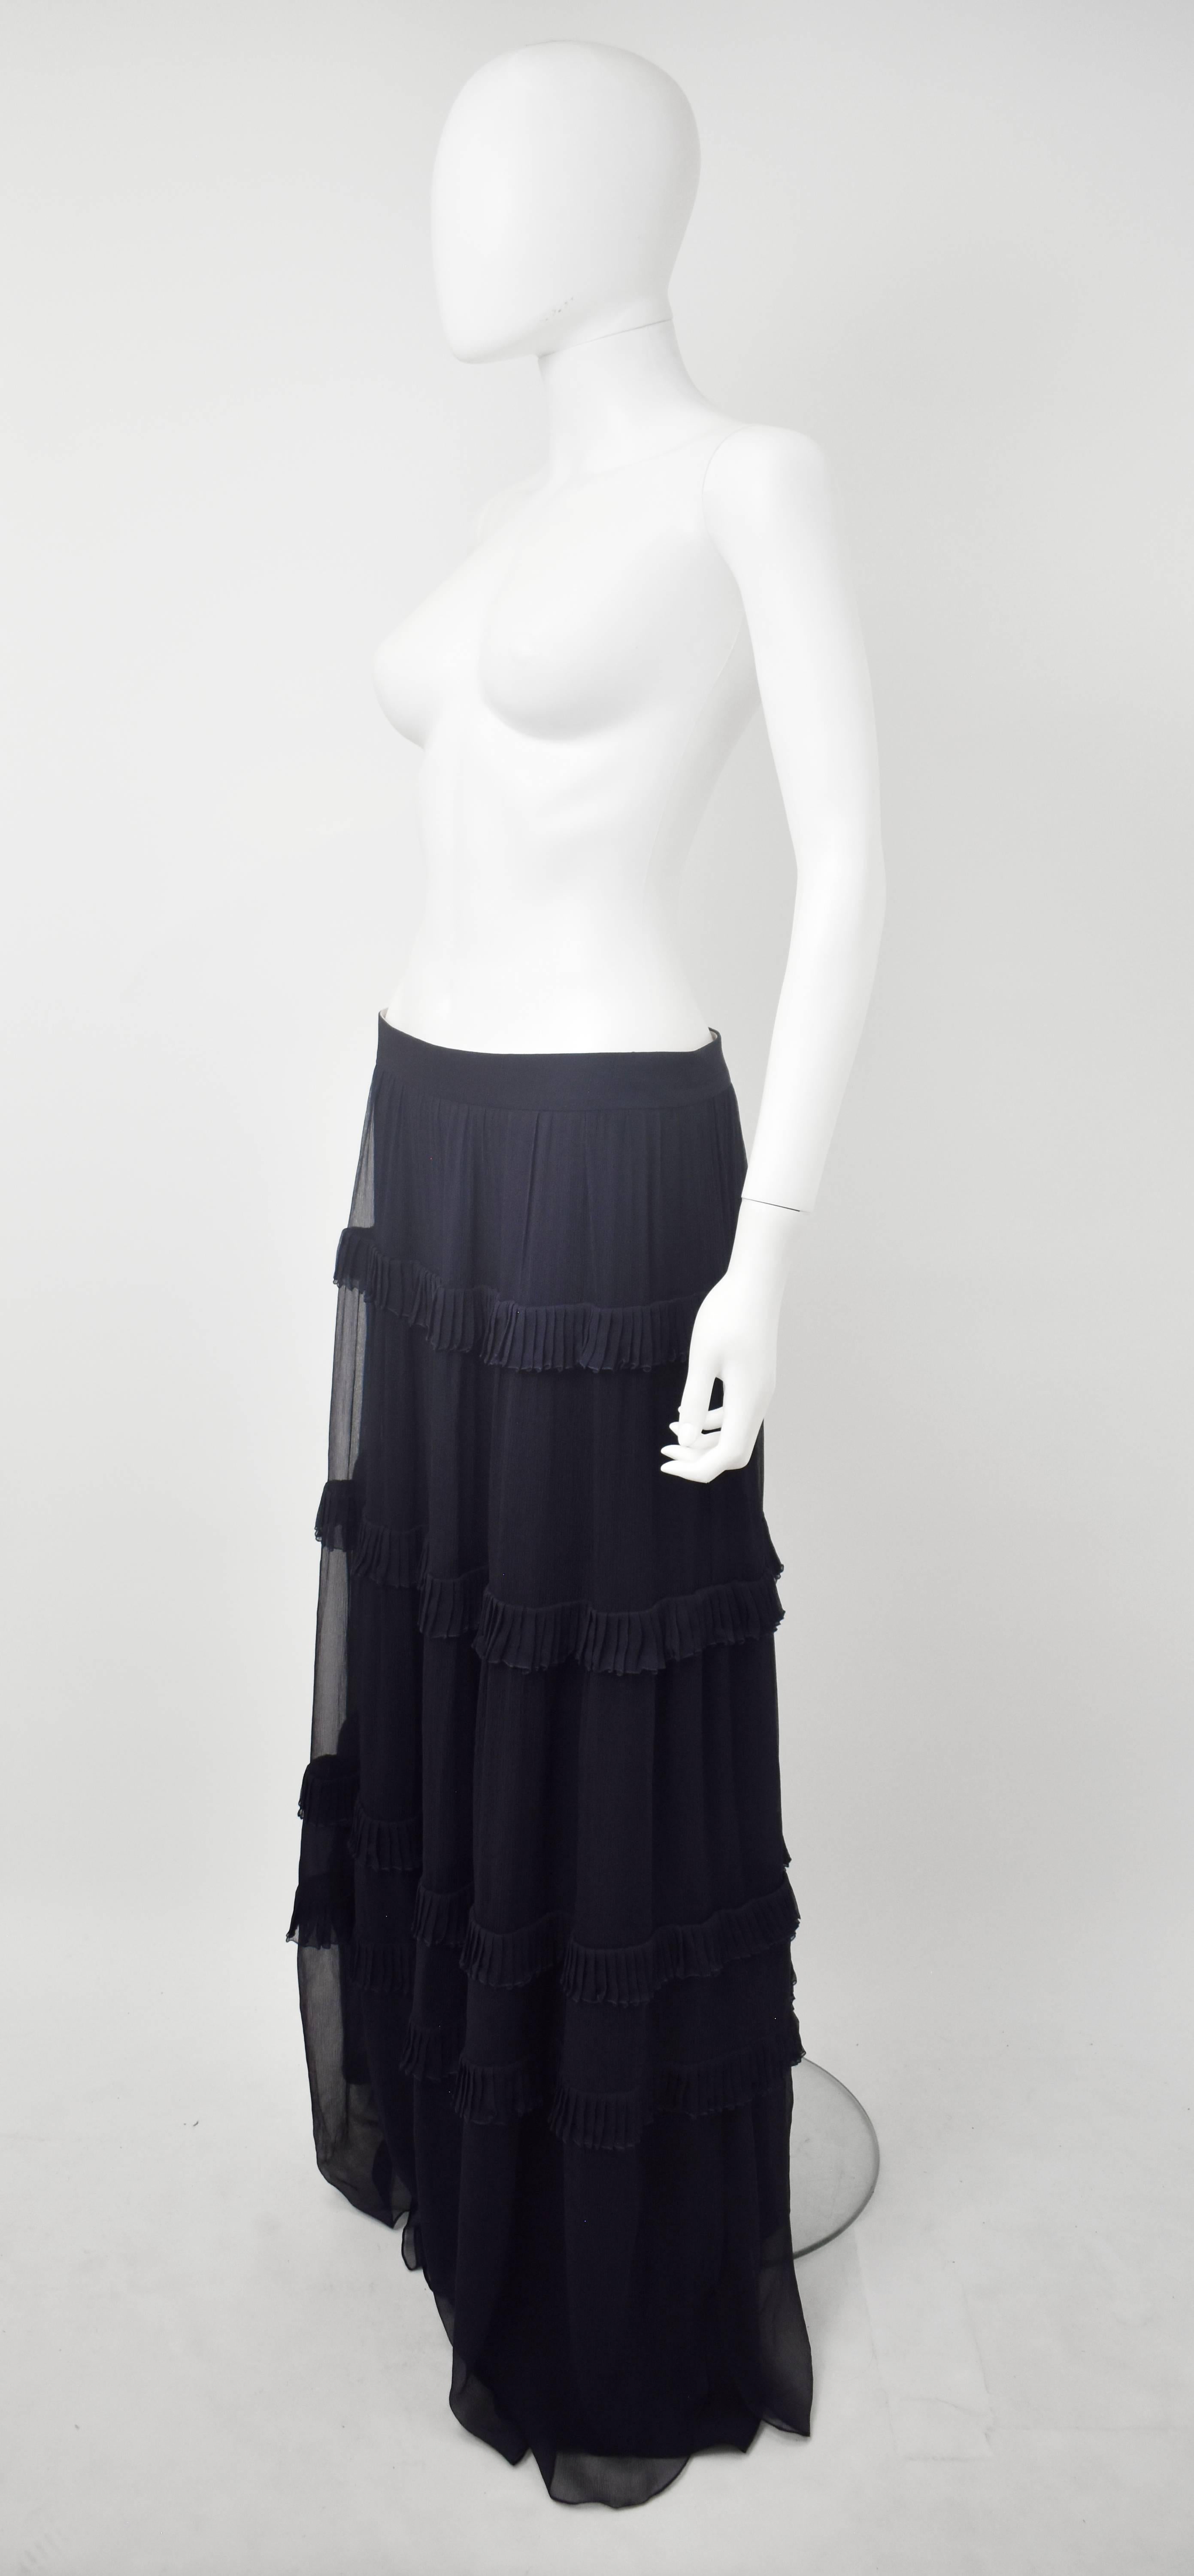 A light and elegant navy blue skirt from French fashion house Chloe. The full-length skirt is made from layers of semi-sheer soft silk that has beautiful, fluid movement. The top layer of the skirt has four tiers with ruffle details along the seams